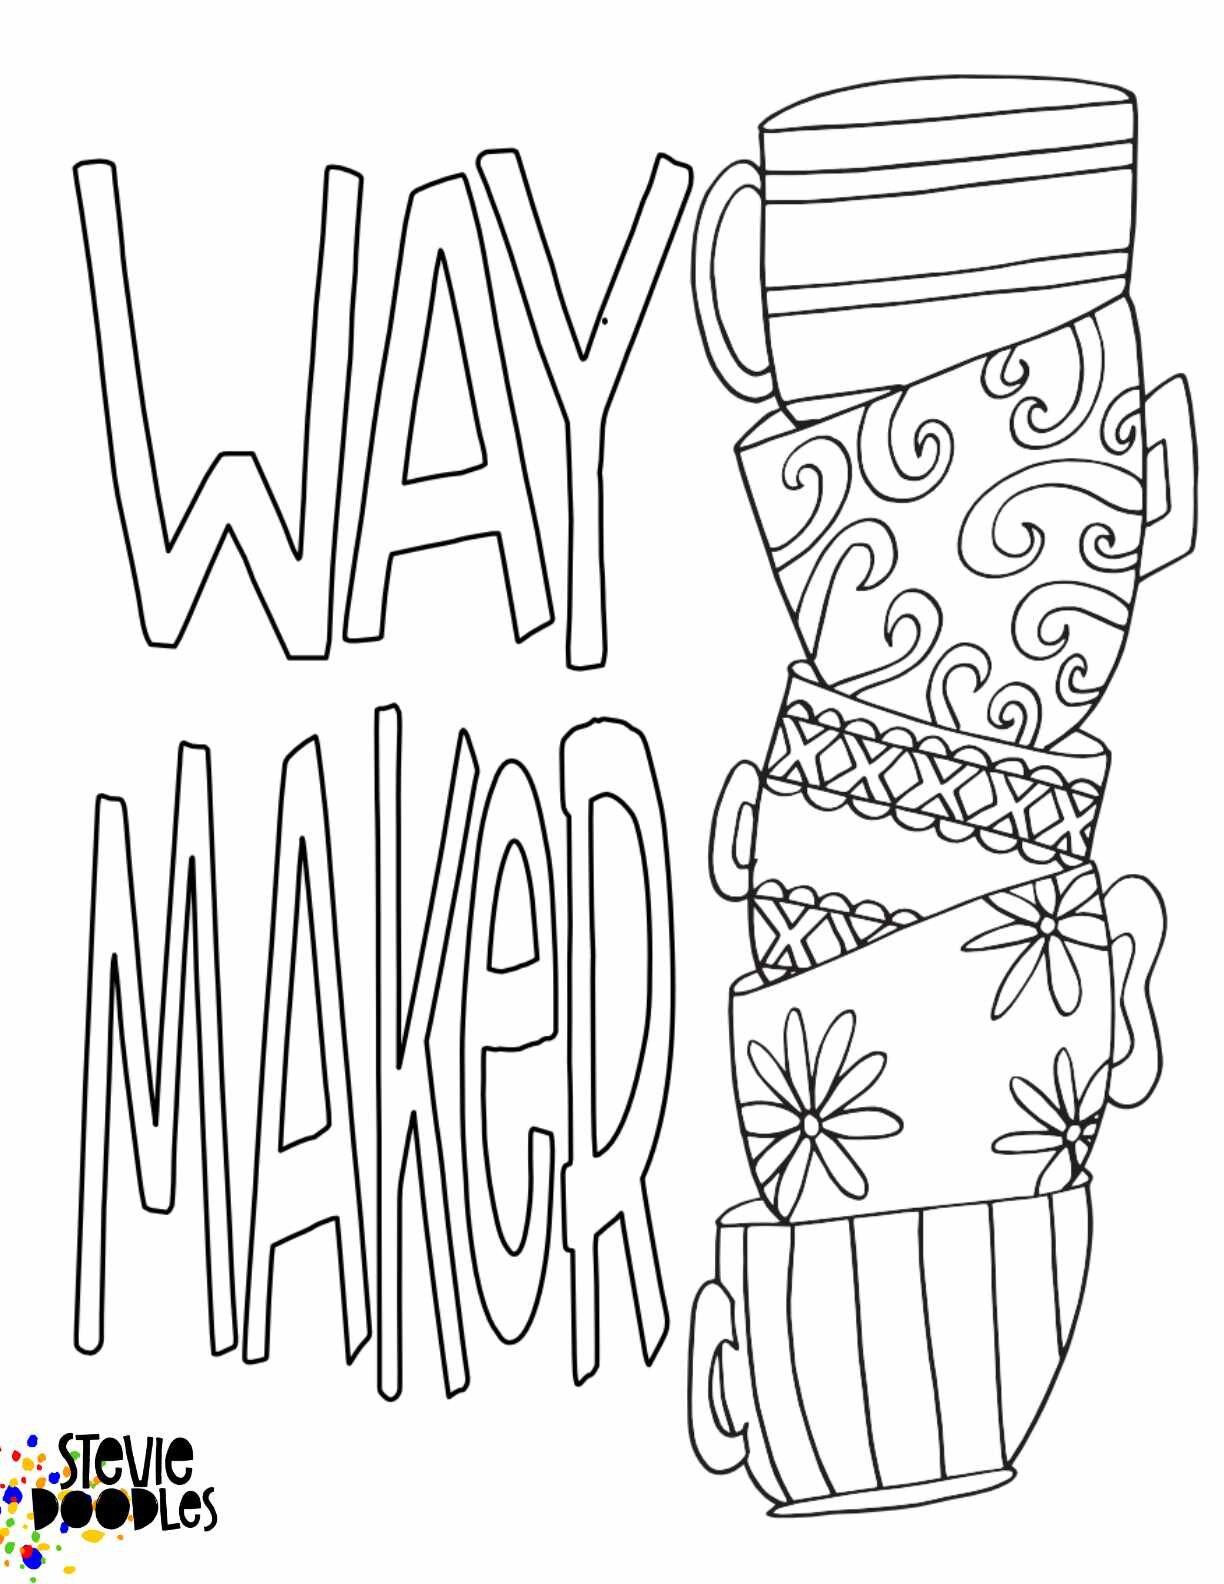 Way maker tea cups free coloring page